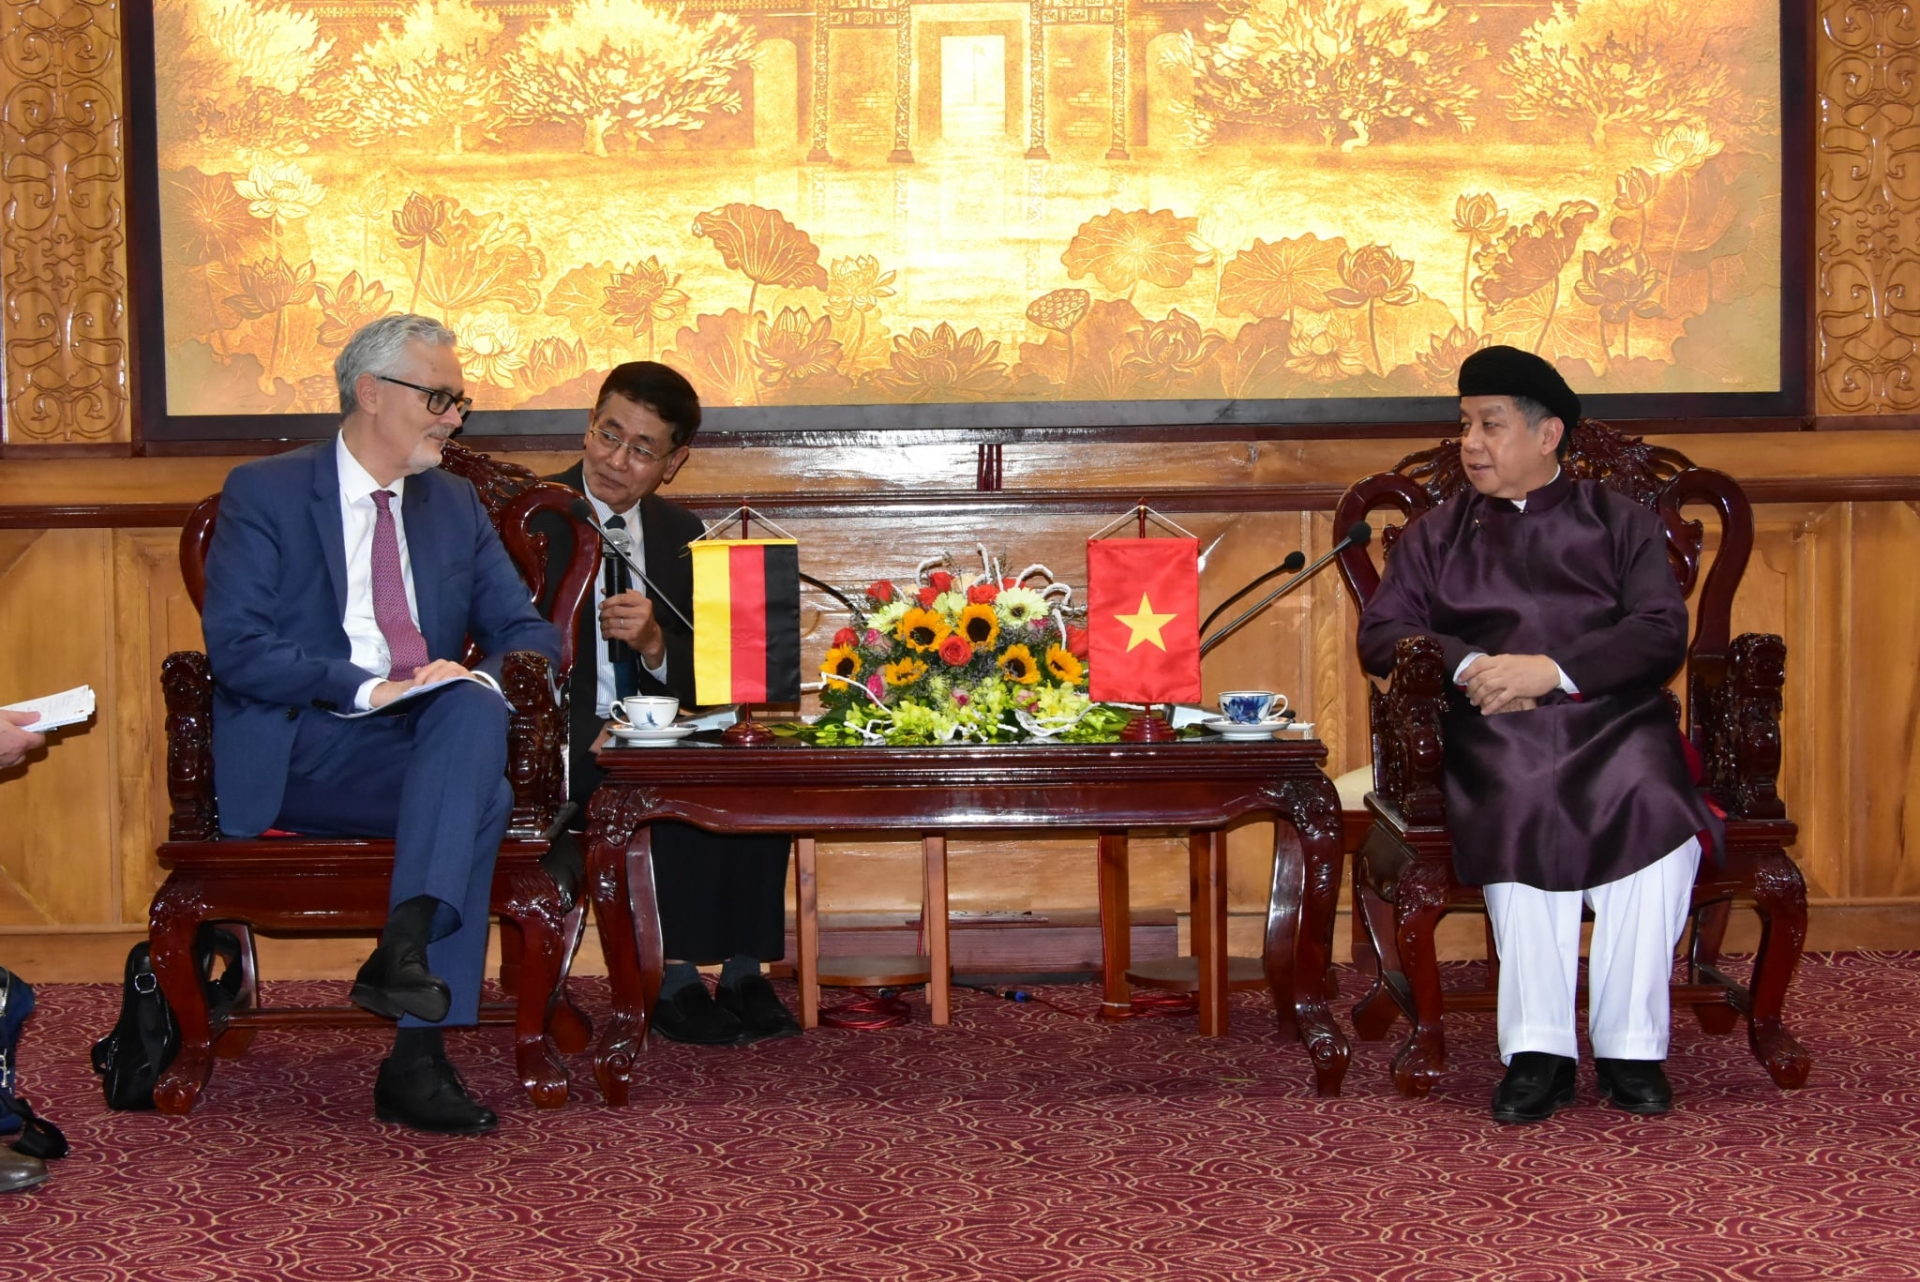 Chairman of the People's Committee of Thua Thien Hue Province Phan Ngoc Tho received Ambassador of the Federal Republic of Germany to Vietnam, Dr. Guido Hildner on April 19.